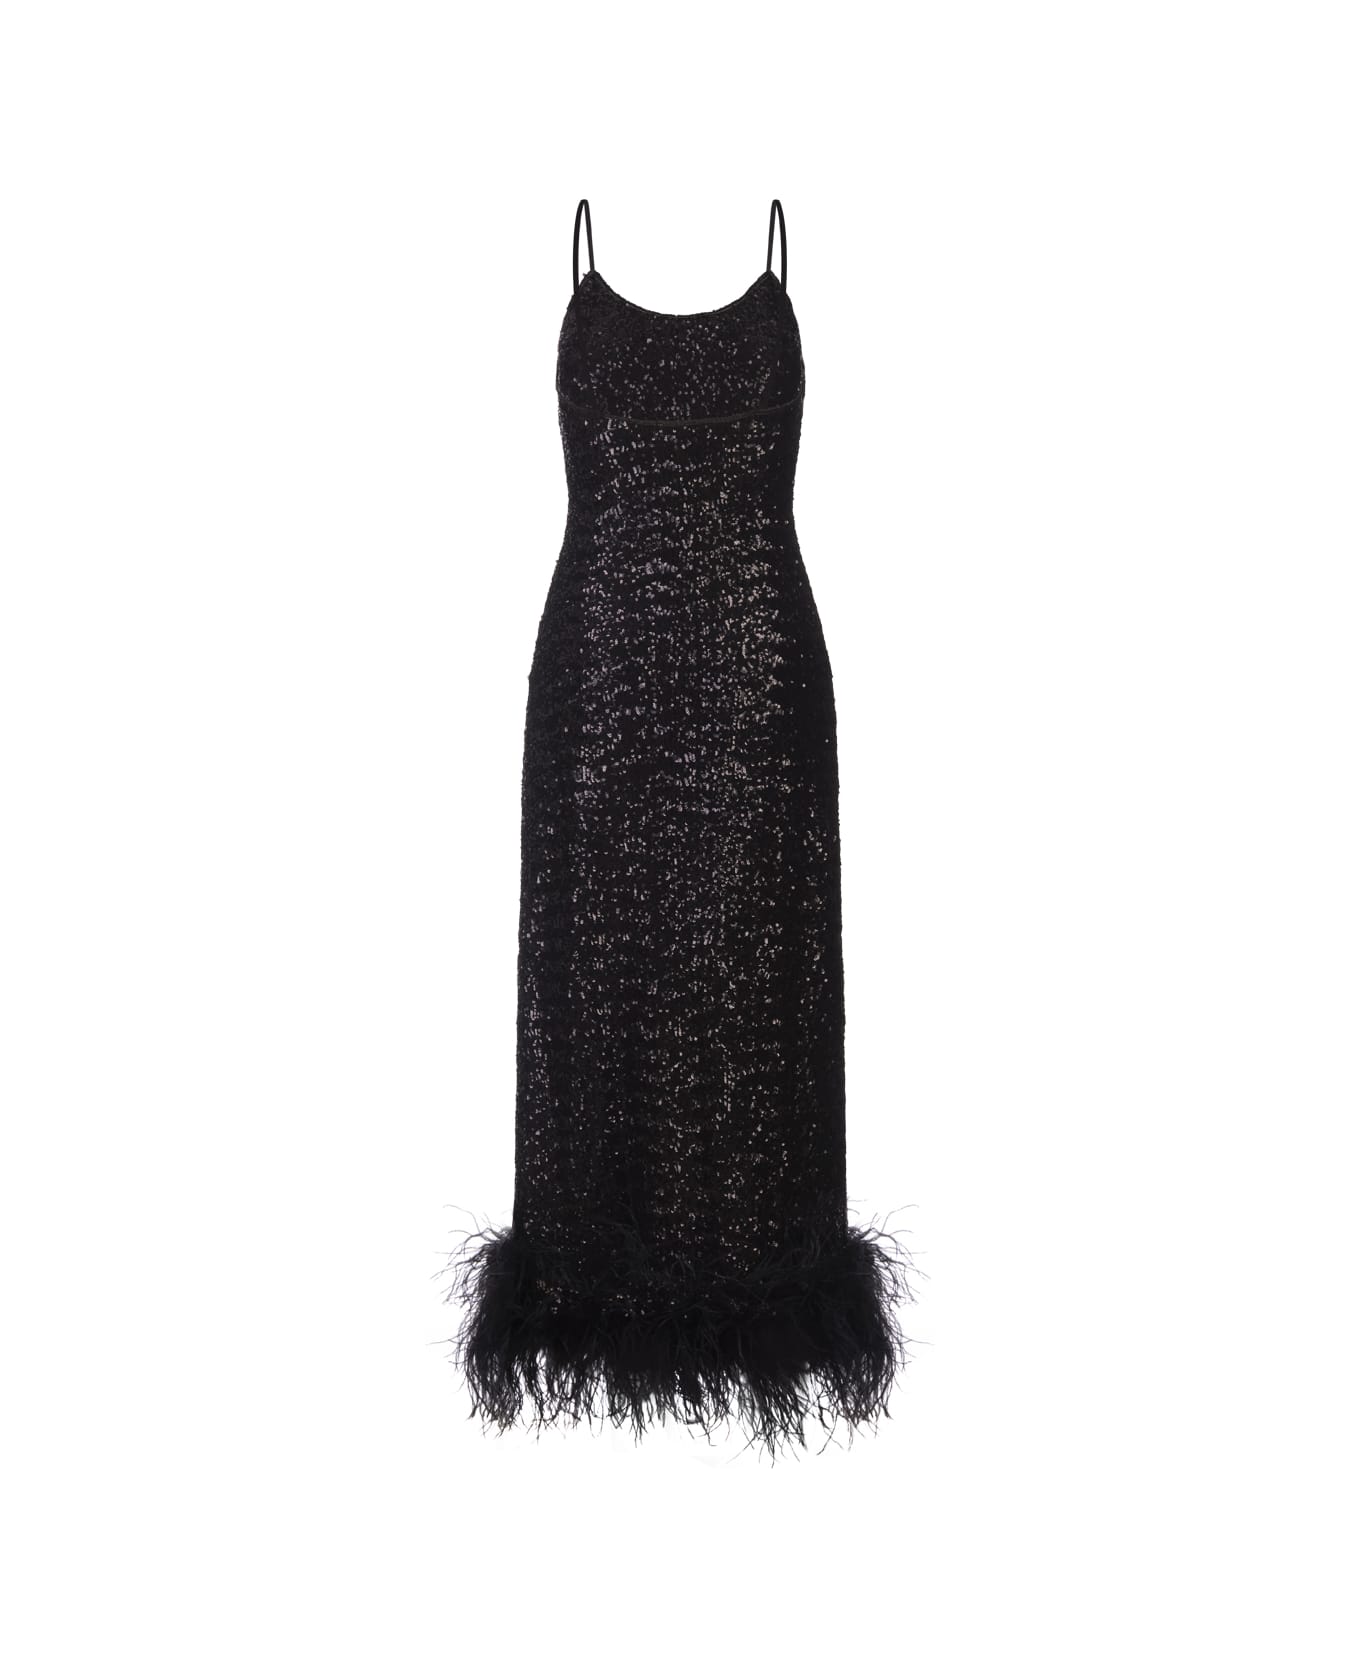 Oseree Black Sequined Petticoat Dress With Feathers - Black